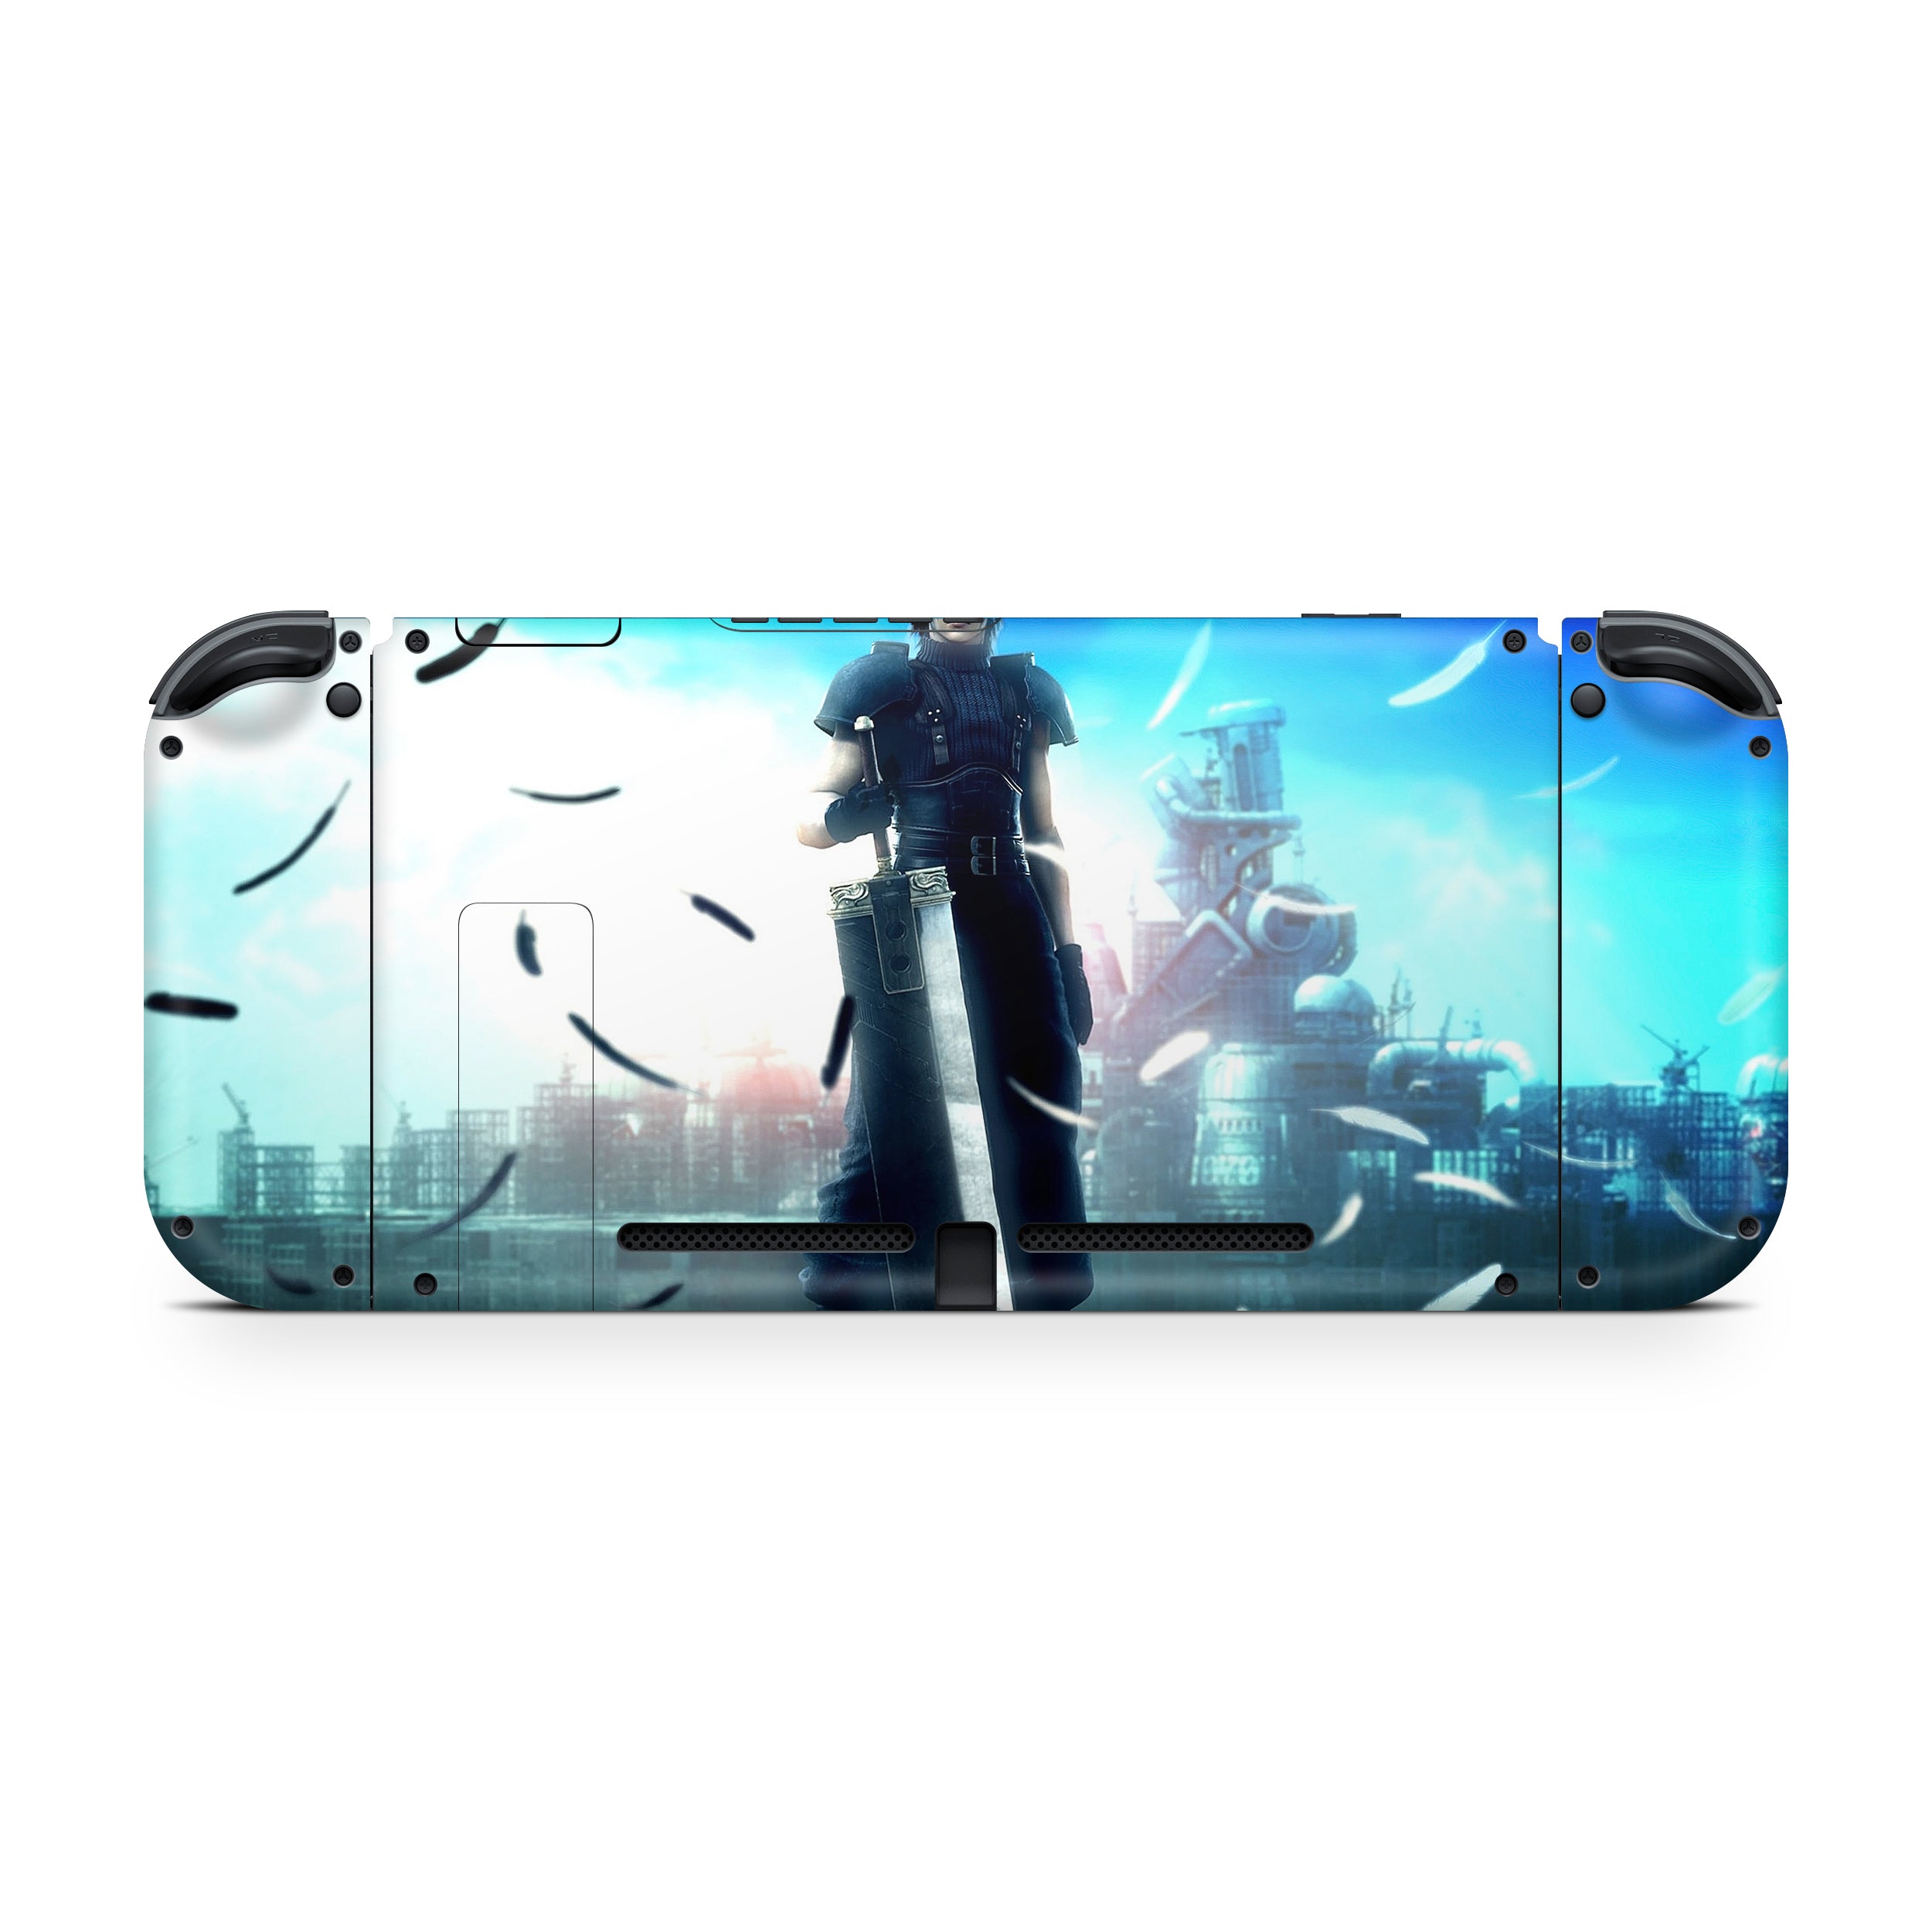 A video game skin featuring a Final Fantasy 7 Cloud And Sephiroth design for the Nintendo Switch.